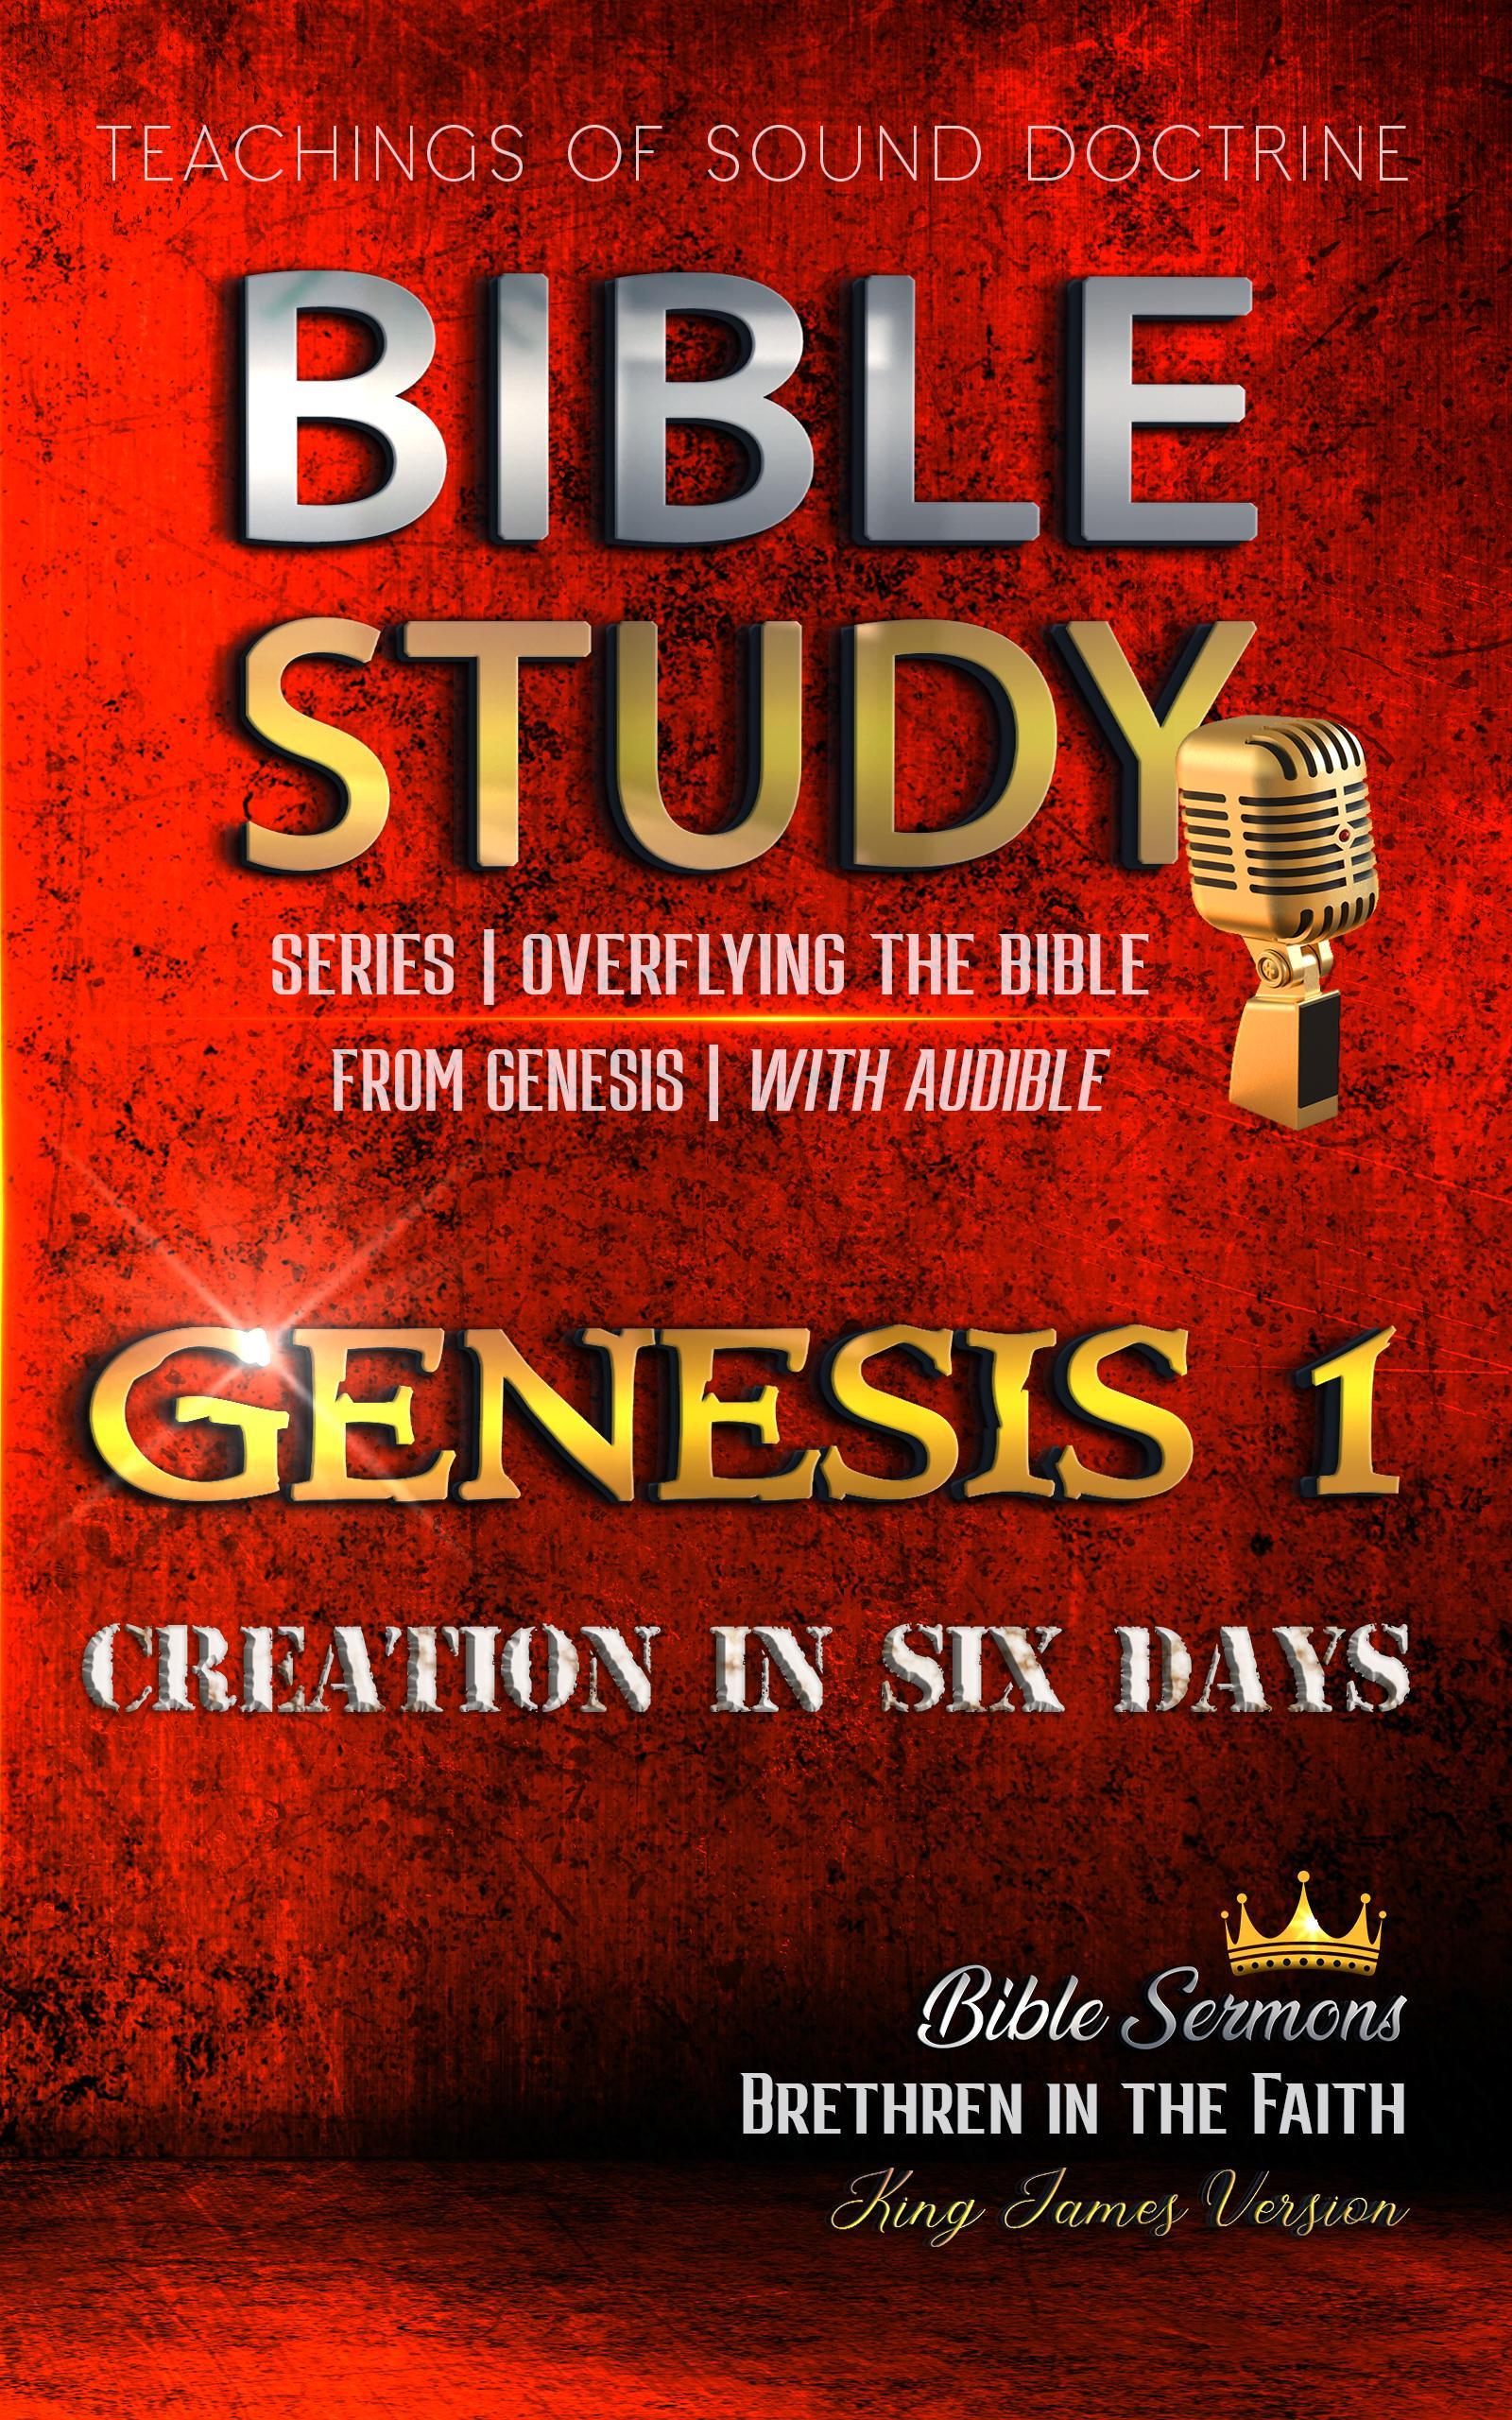 Smashwords Bible Study Genesis 1. Creation in Six Days a book by